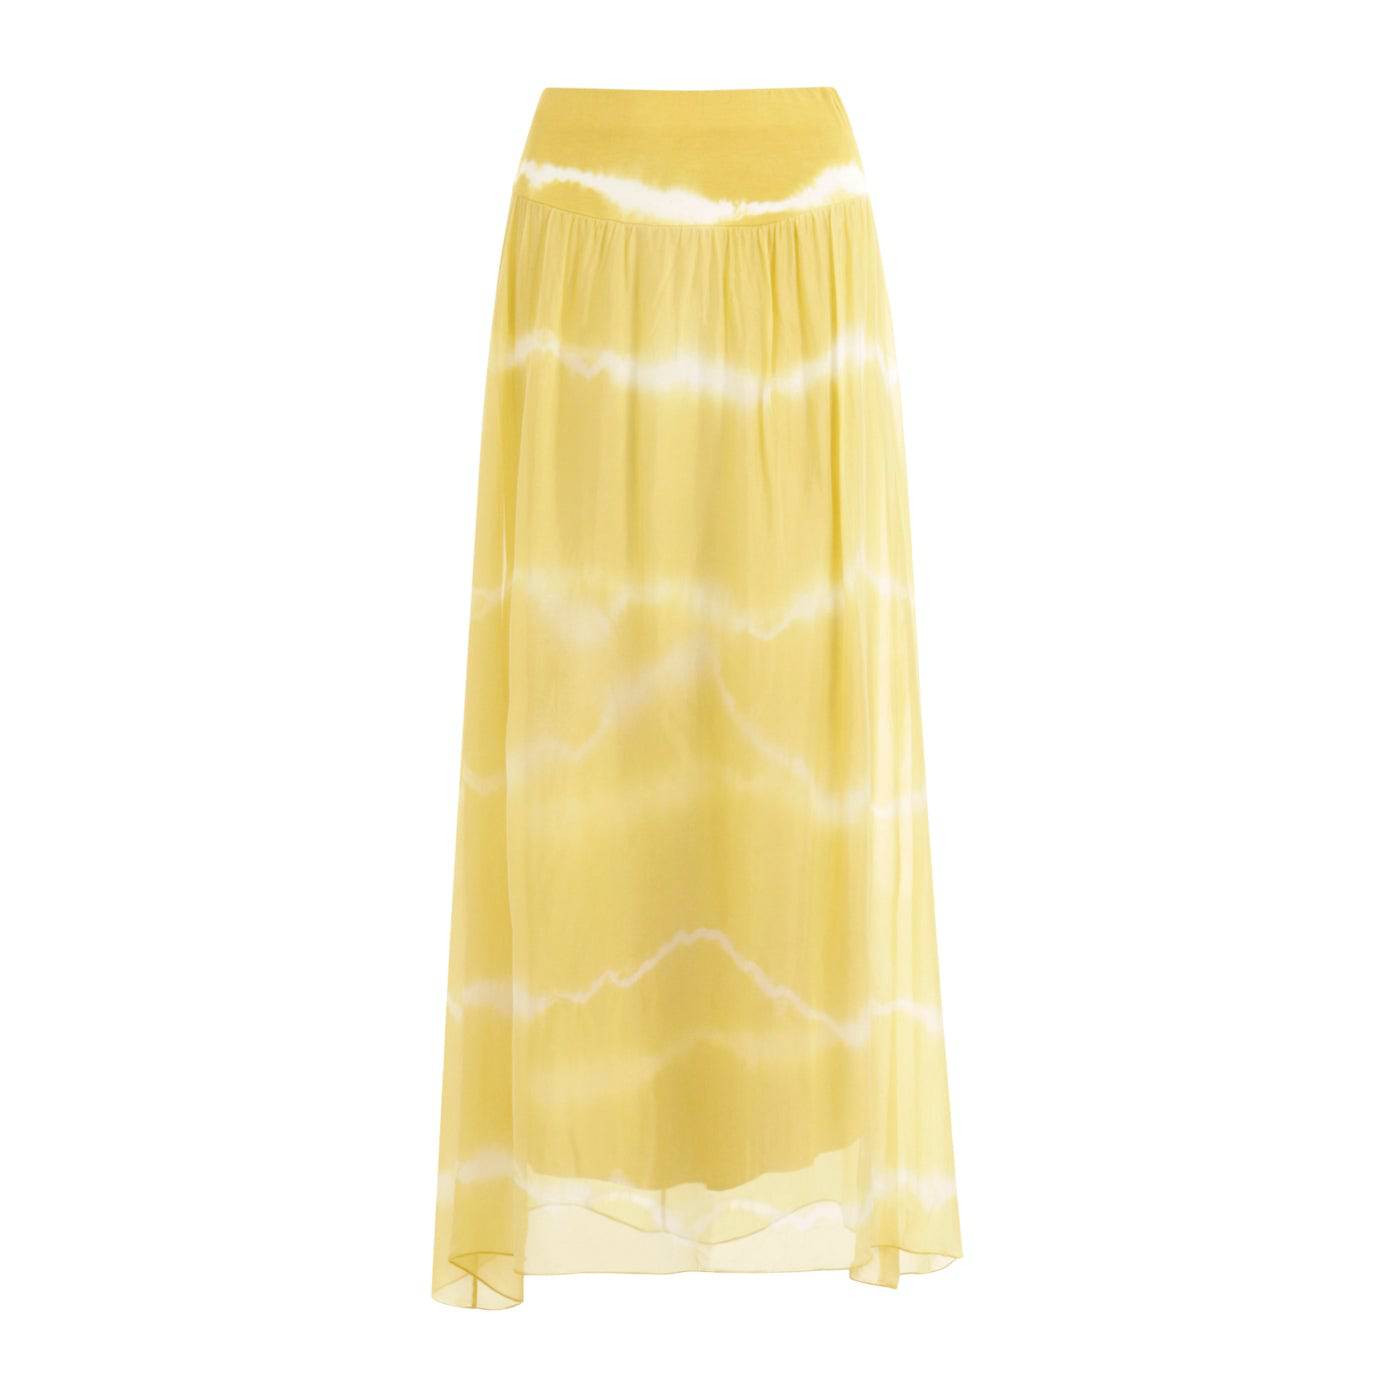 Coster Copenhagen long yellow skirt with jersey waistband - Your Style Your Story